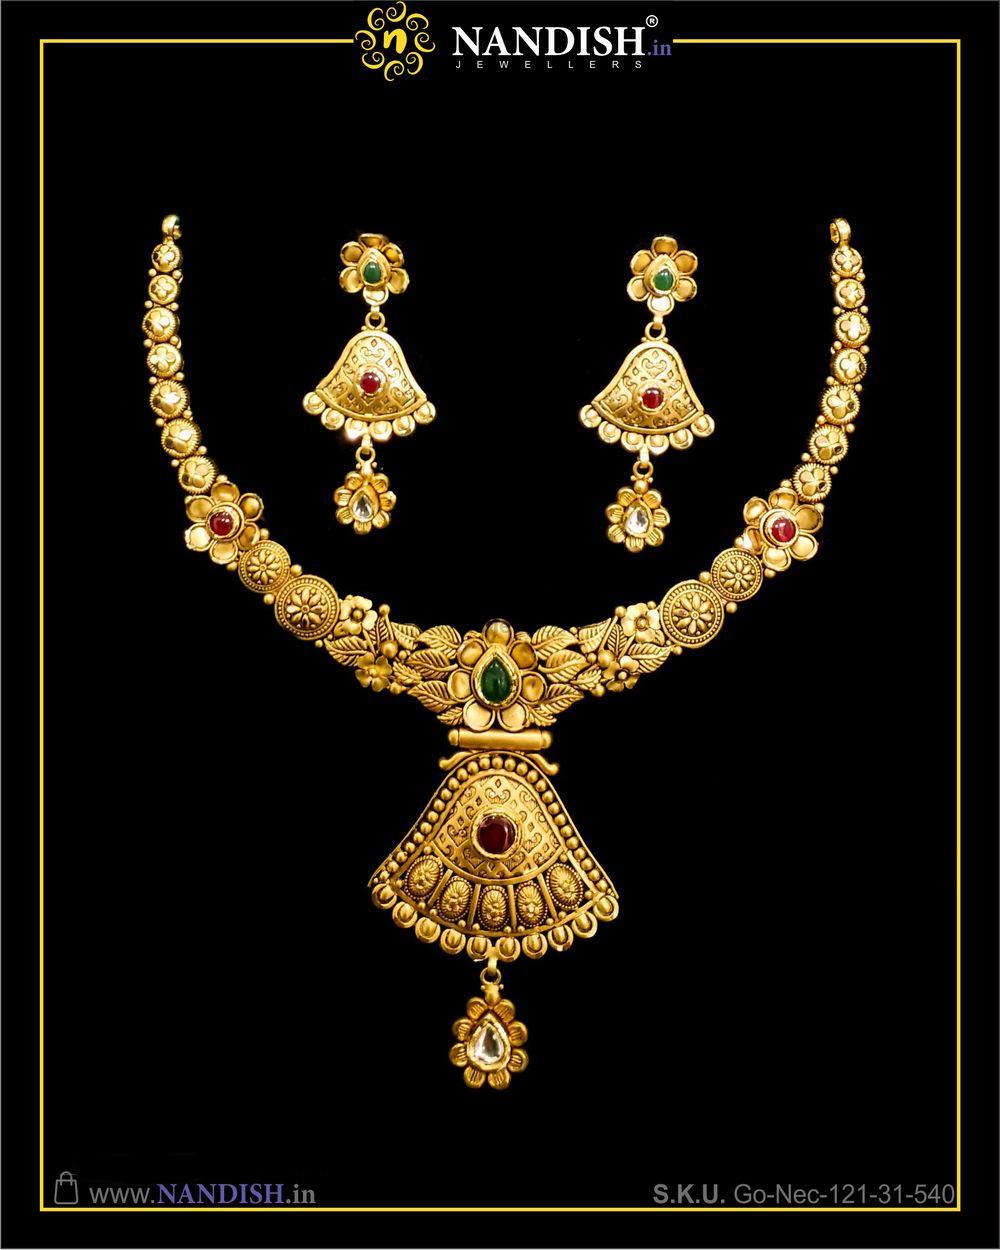 Photo From Gold Necklace - By Nandish Jewellers